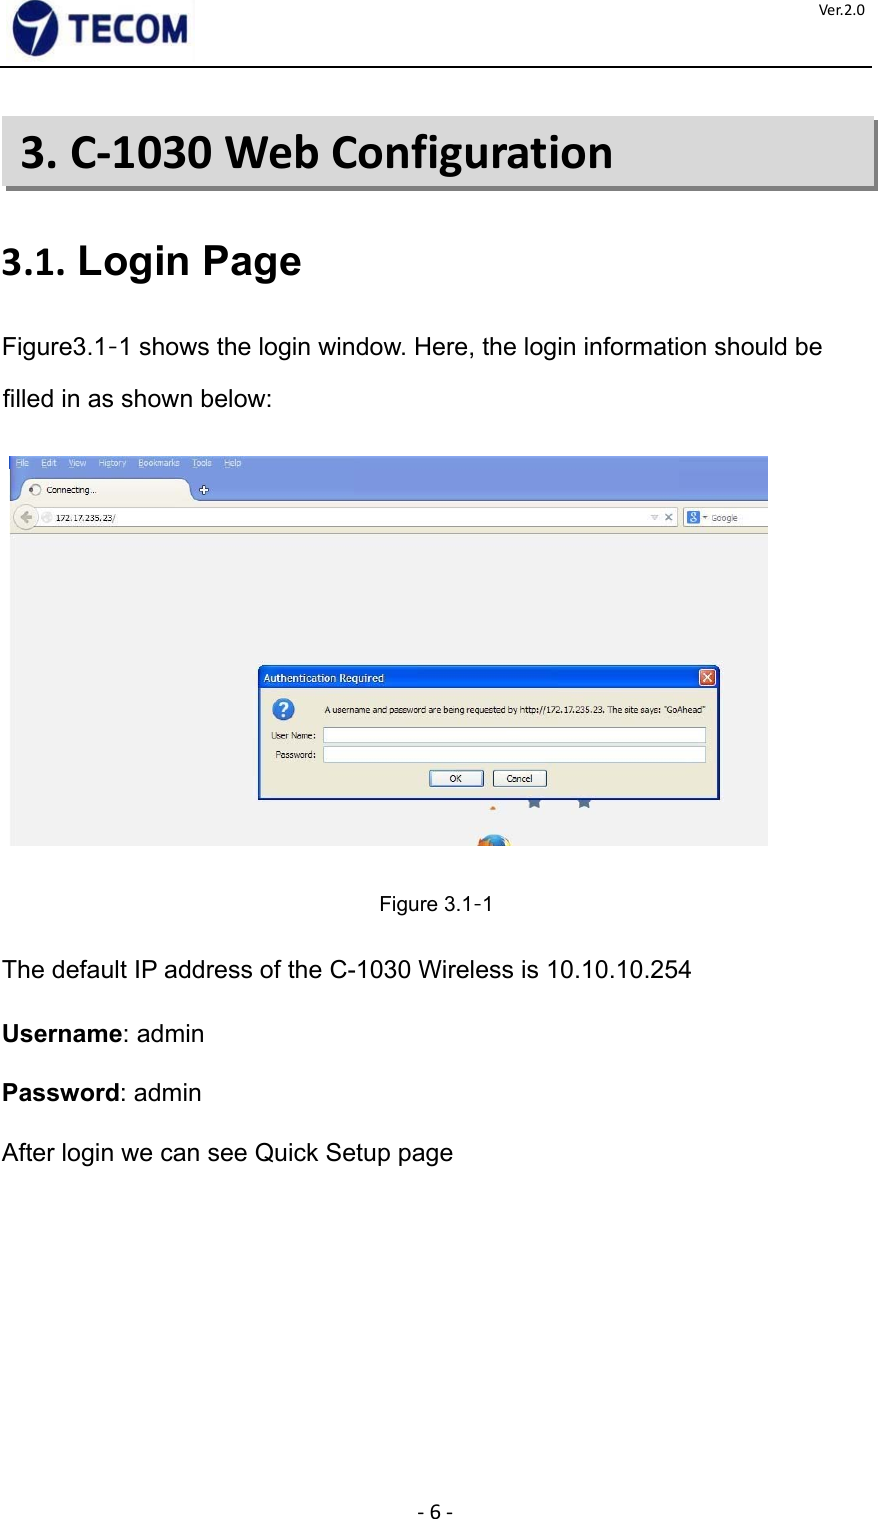  ‐6‐Ver.2.0                 3. C-1030 Web Configuration     3.1. Login Page    Figure3.1‐1 shows the login window. Here, the login information should be filled in as shown below:        Figure 3.1‐1    The default IP address of the C-1030 Wireless is 10.10.10.254    Username: admin  Password: admin  After login we can see Quick Setup page                      